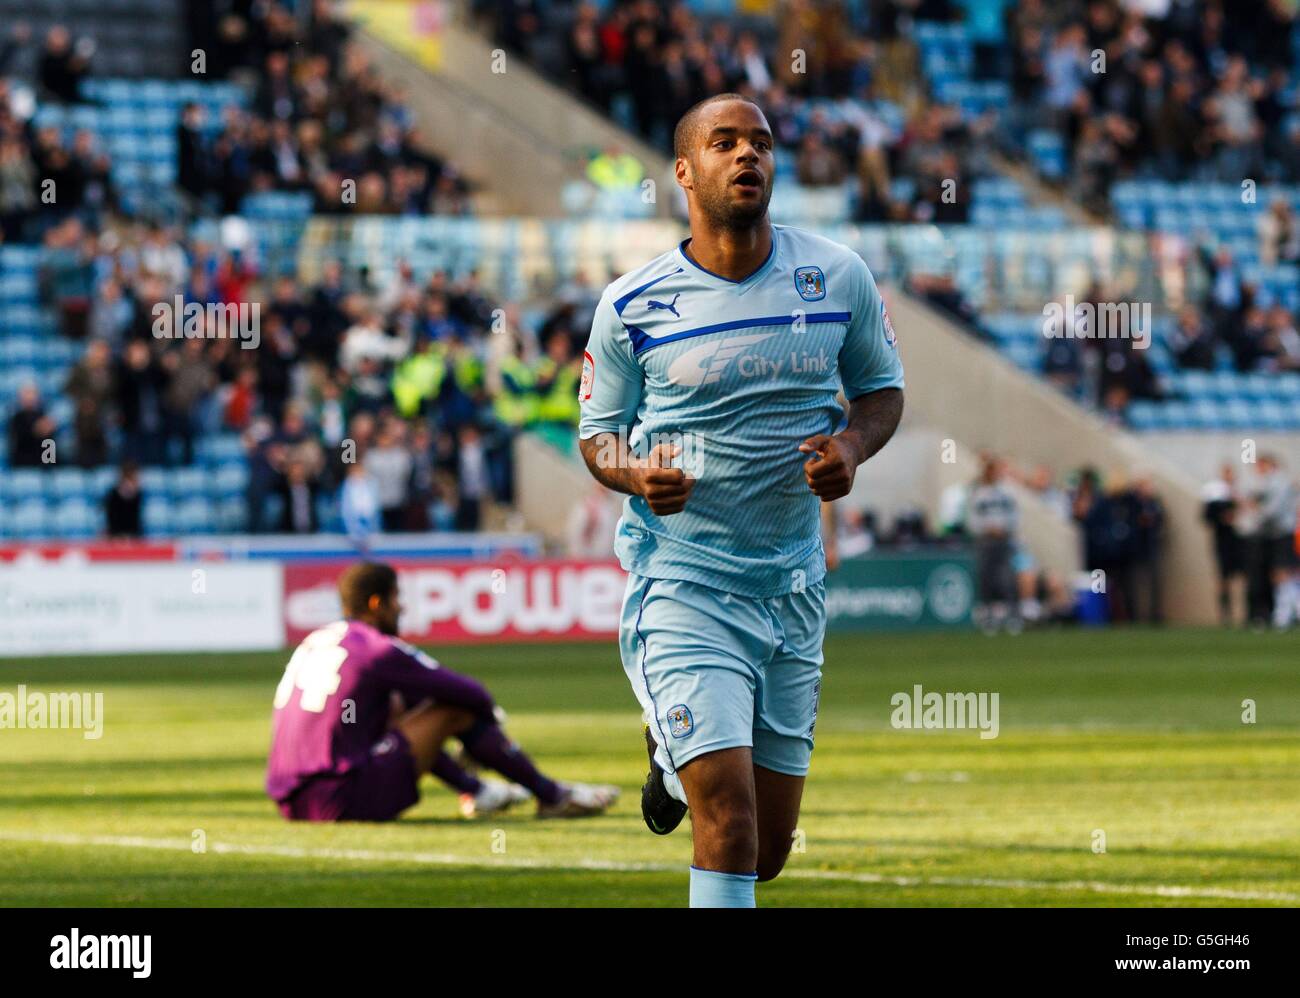 Coventry City's David McGoldrick celebrates scoring the only goal of the game during the npower Football League One match at the Ricoh Arena, Coventry. Stock Photo